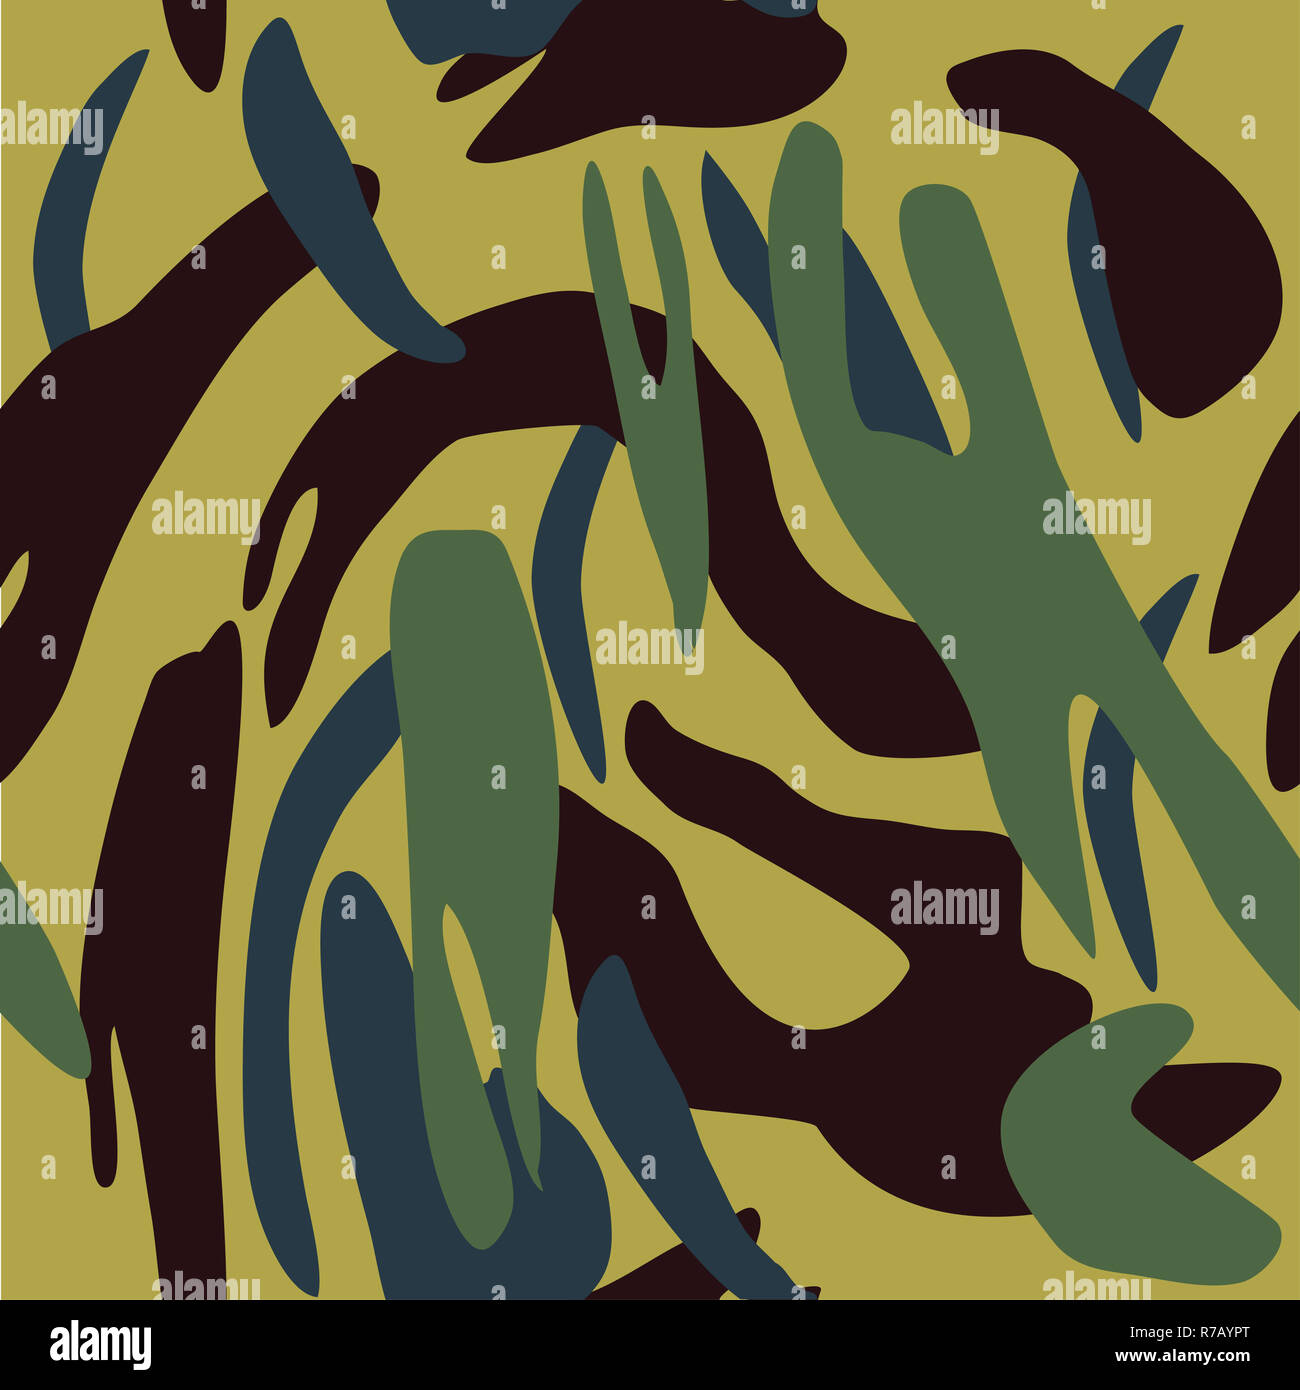 Camouflage pattern background seamless vector illustration. Classic military clothing style. Camo repeat texture shirt print. Grey khaki black yellow colors forest texture Stock Photo